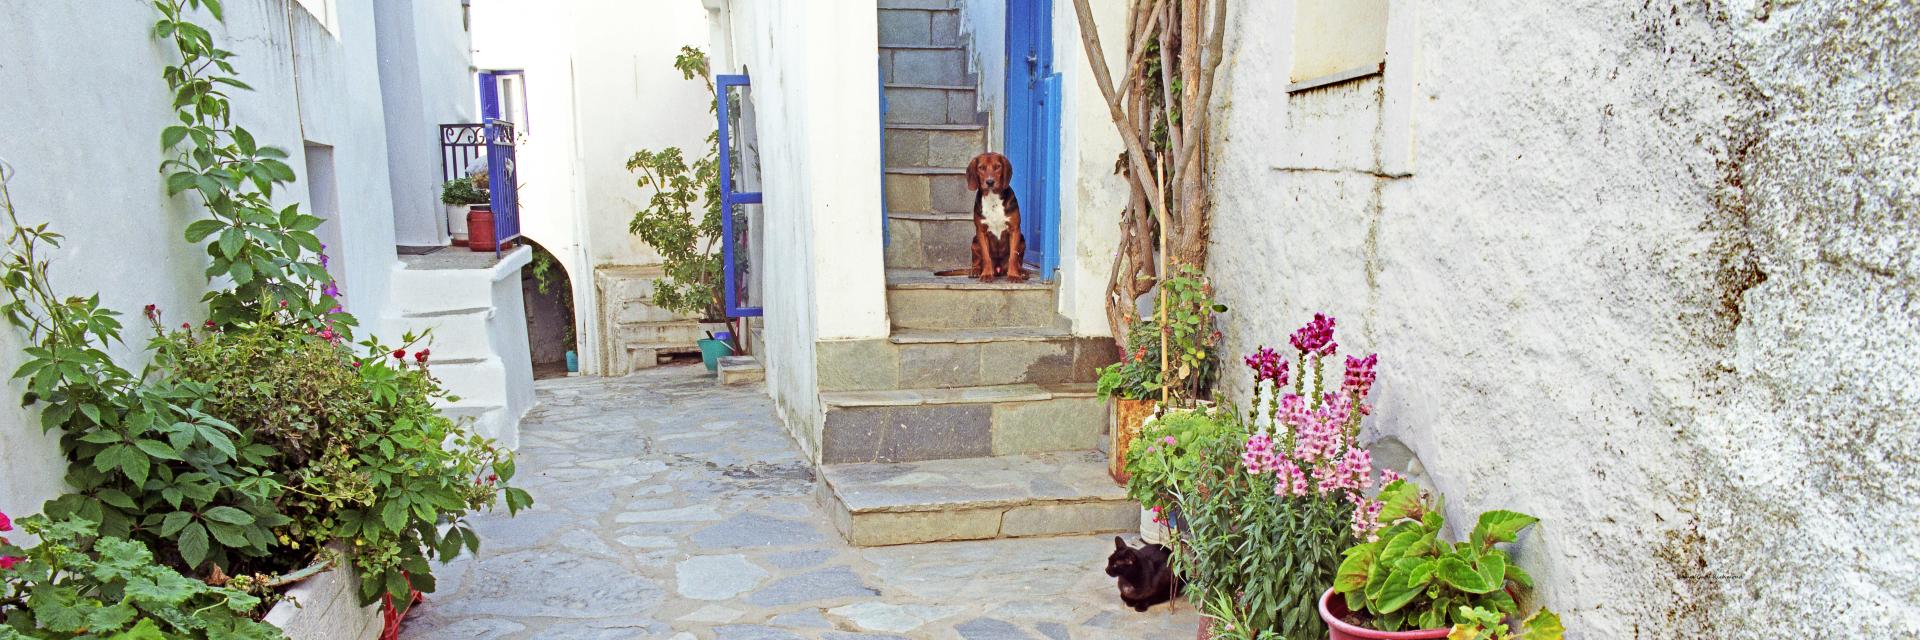 18154p architecture, santorini, greece dog and cat, stairs,,.jpg